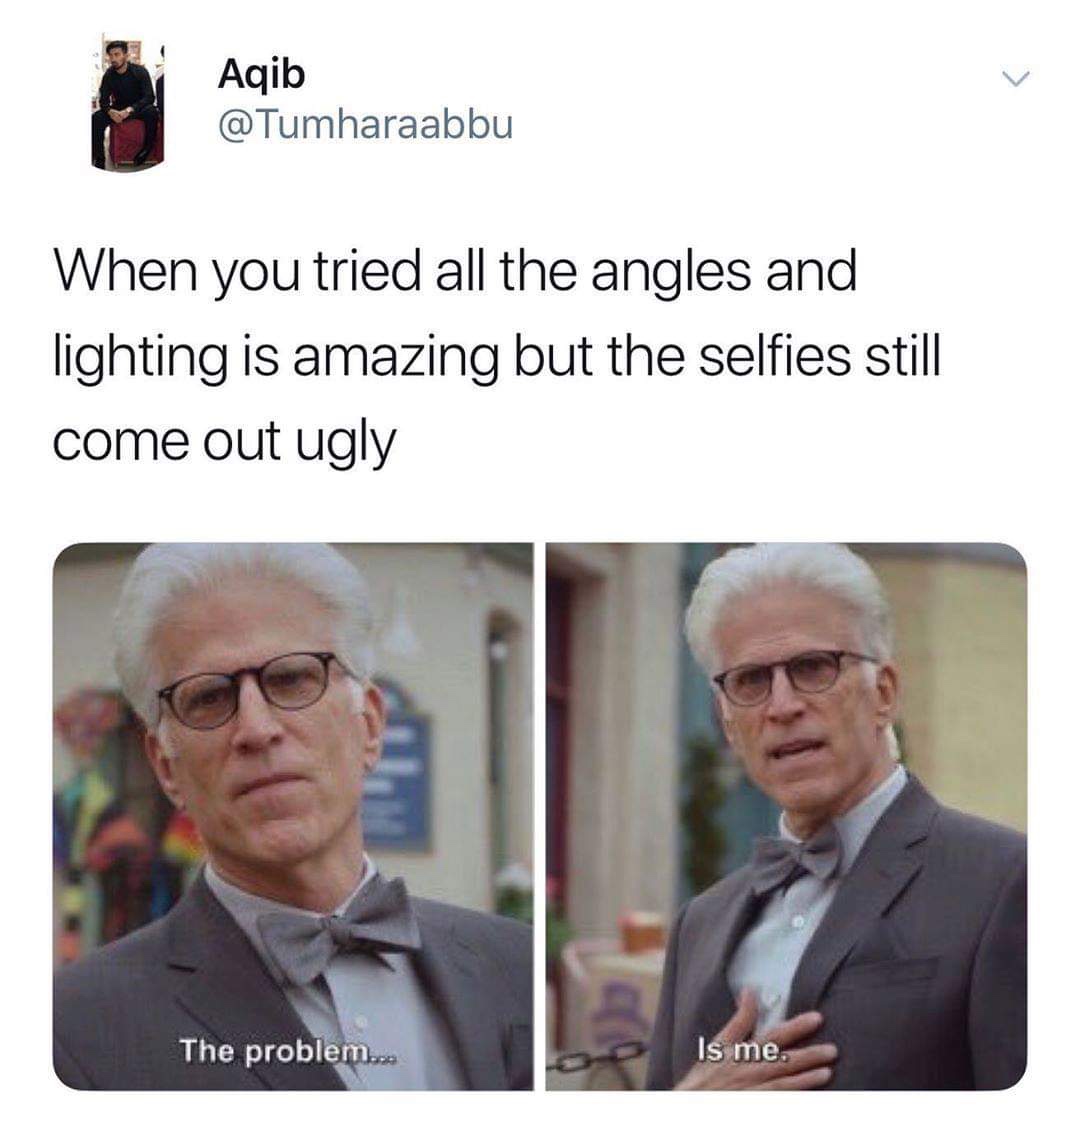 meme - new memes - Aqib When you tried all the angles and lighting is amazing but the selfies still come out ugly The problem... Is me.